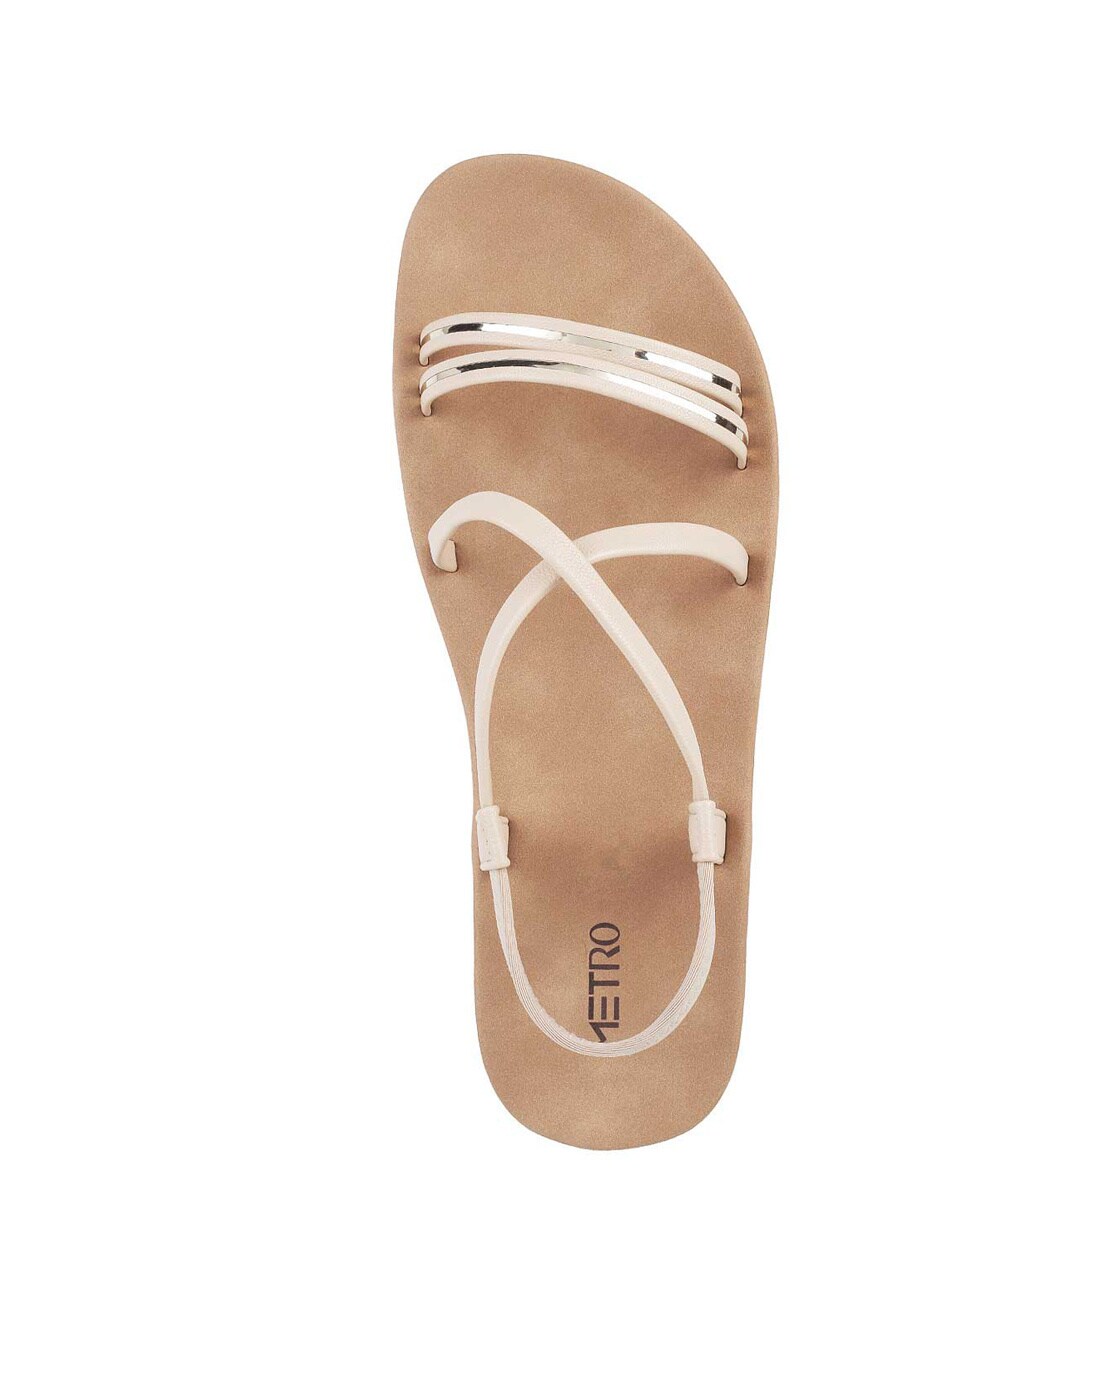 Buy online Metro Women Grey Sandals Size (3 Uk/india (36eu))  (32-9342-16-36-white) from heels for Women by Metro for ₹1290 at 0% off |  2024 Limeroad.com